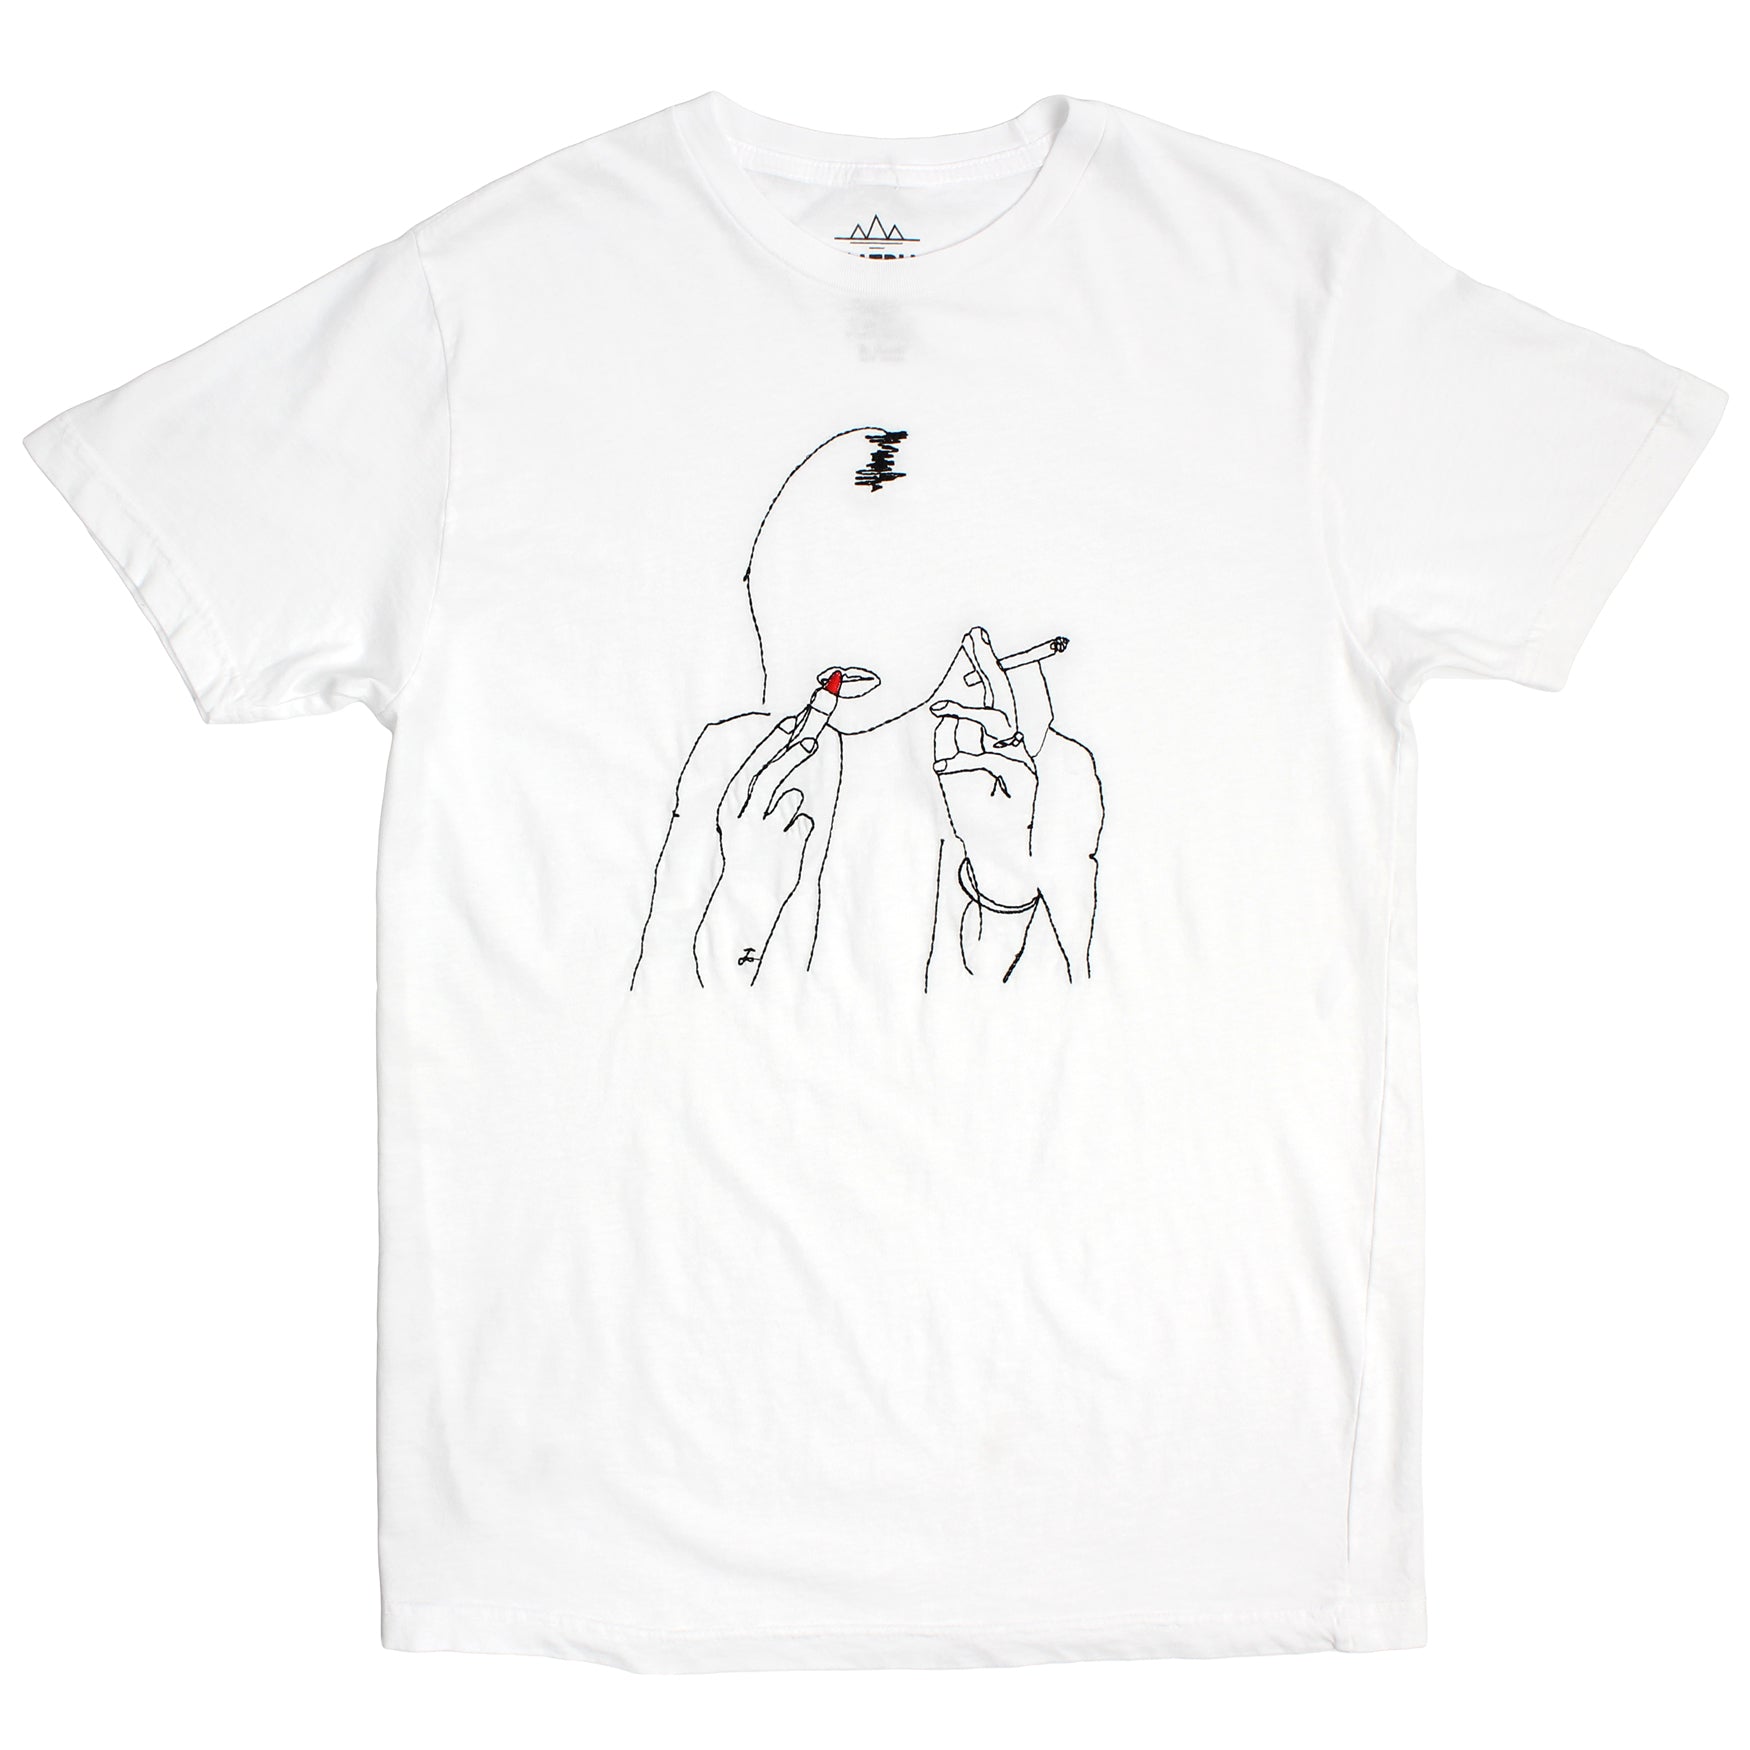 Kate Embroidered white T-shirt by Altru Apparel